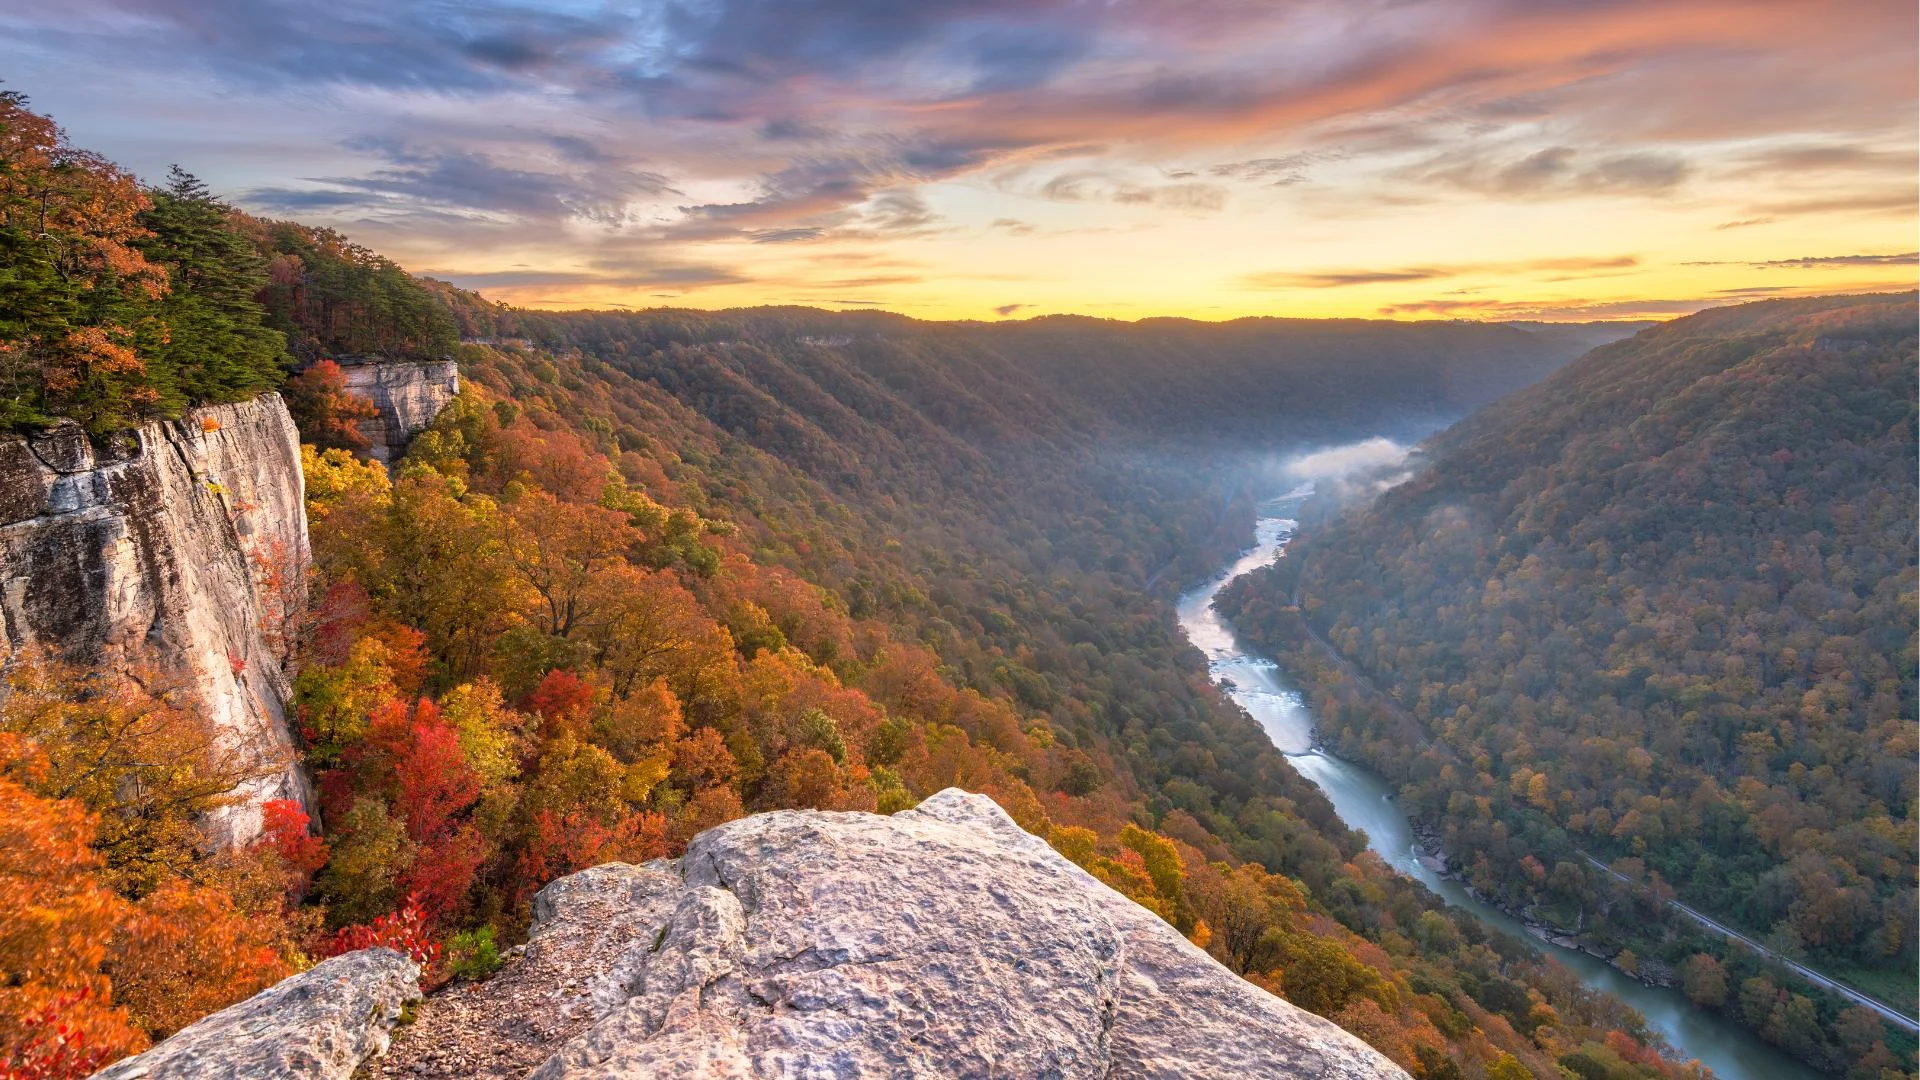 Autumn in New River Gorge